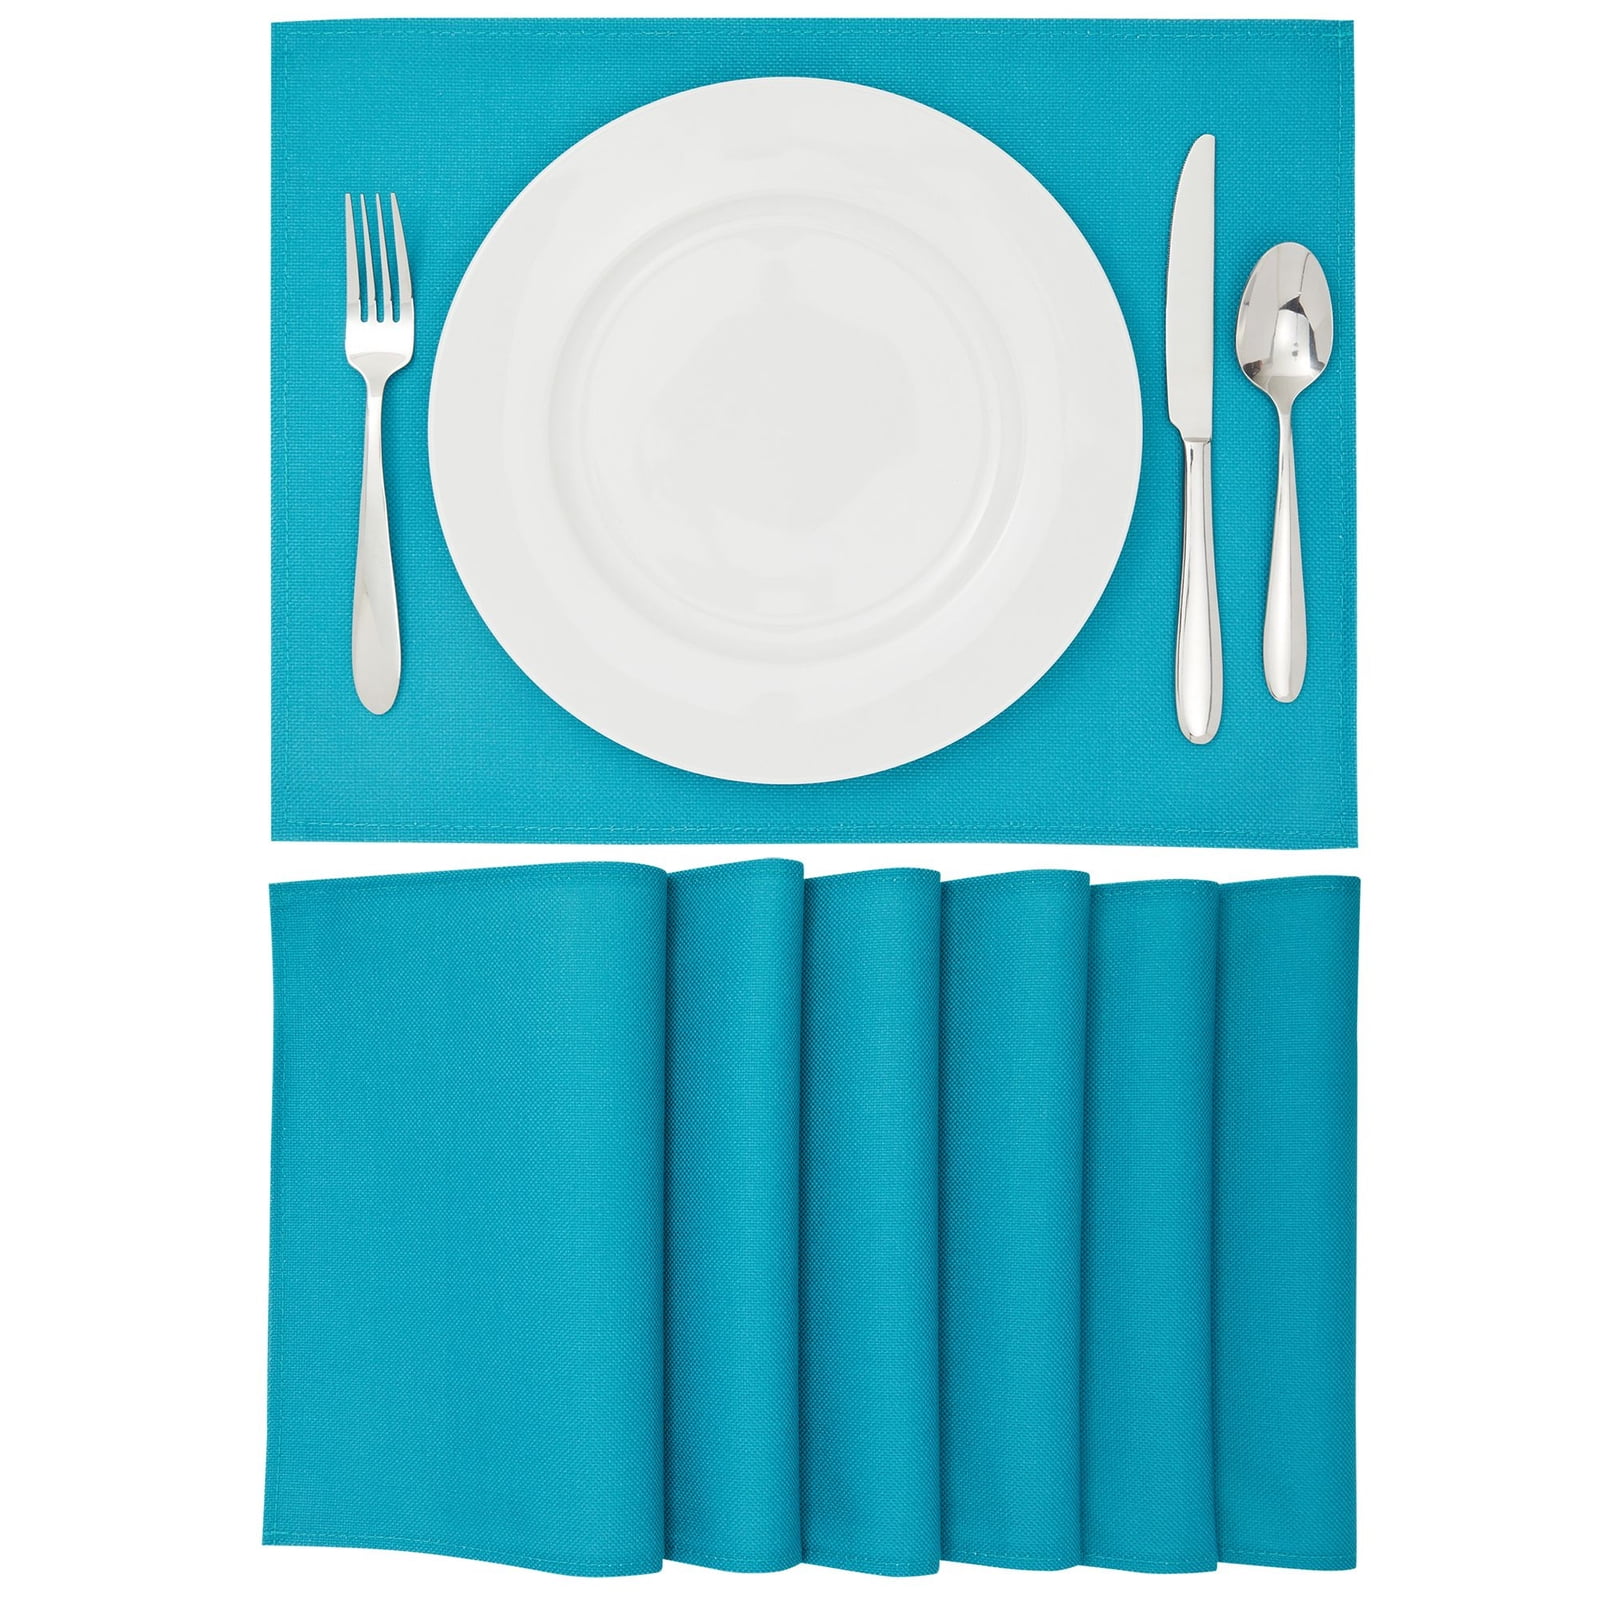 Set of 6 Teal Burlap Woven Placemats for Dining Table Decor and  Accessories, 12.6 x 16.5 in. - Walmart.com